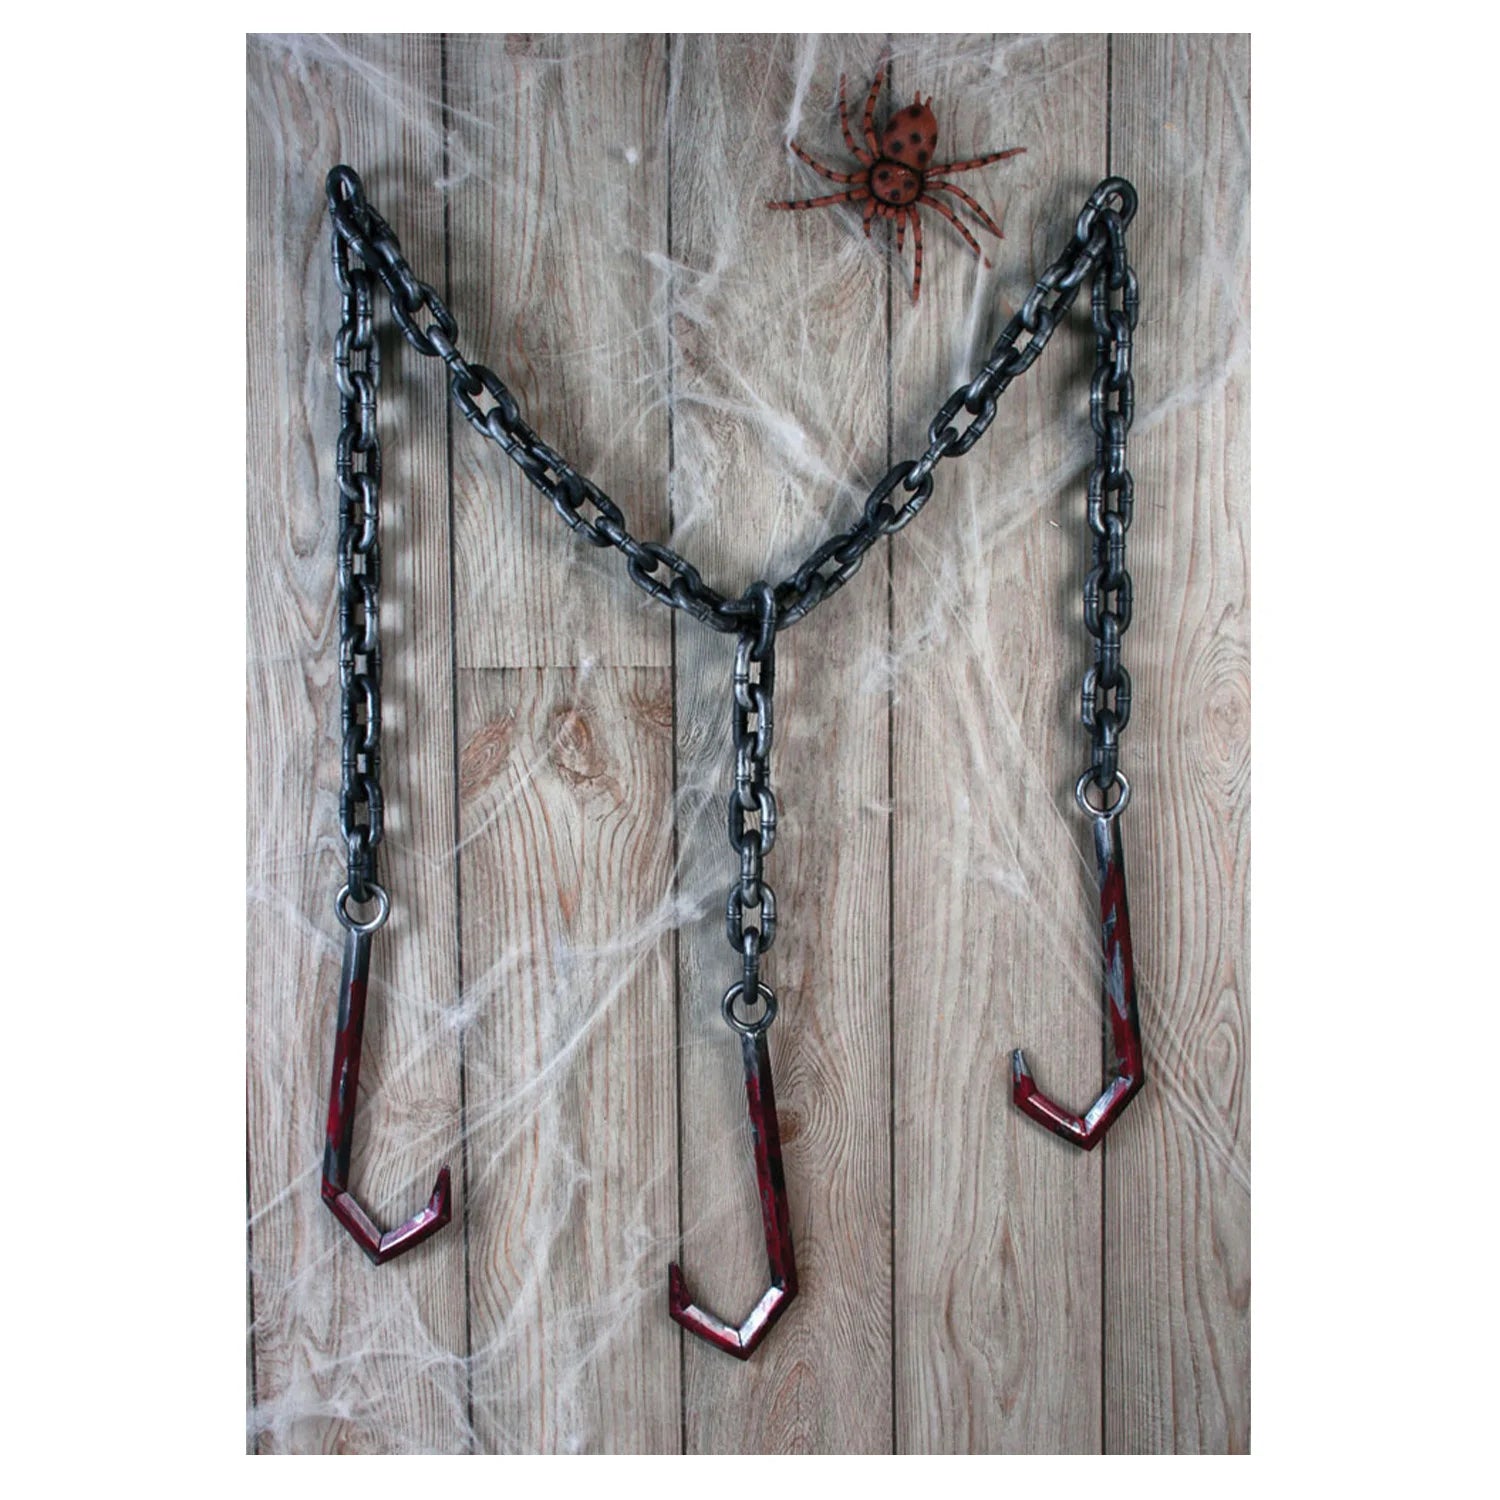 Meat hook with chains 3 pcs